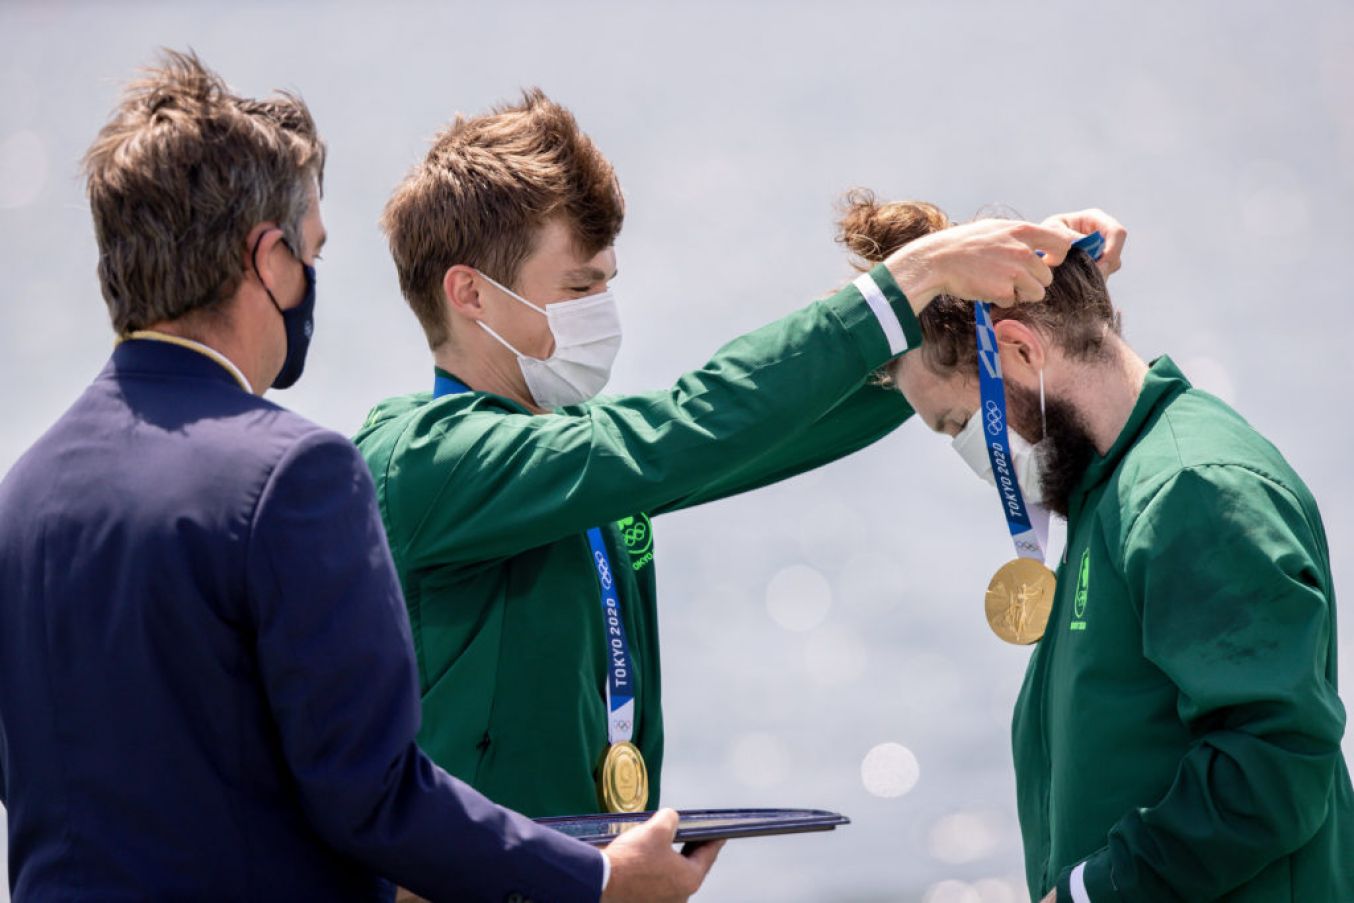 Ireland’s Fintan Mccarthy Presents Paul O’donovan With His Gold Medal After Winning The Lightweight Men’s Double Sculls Final At The 2020 Olympic Games.
©Inpho/Morgan Treacy